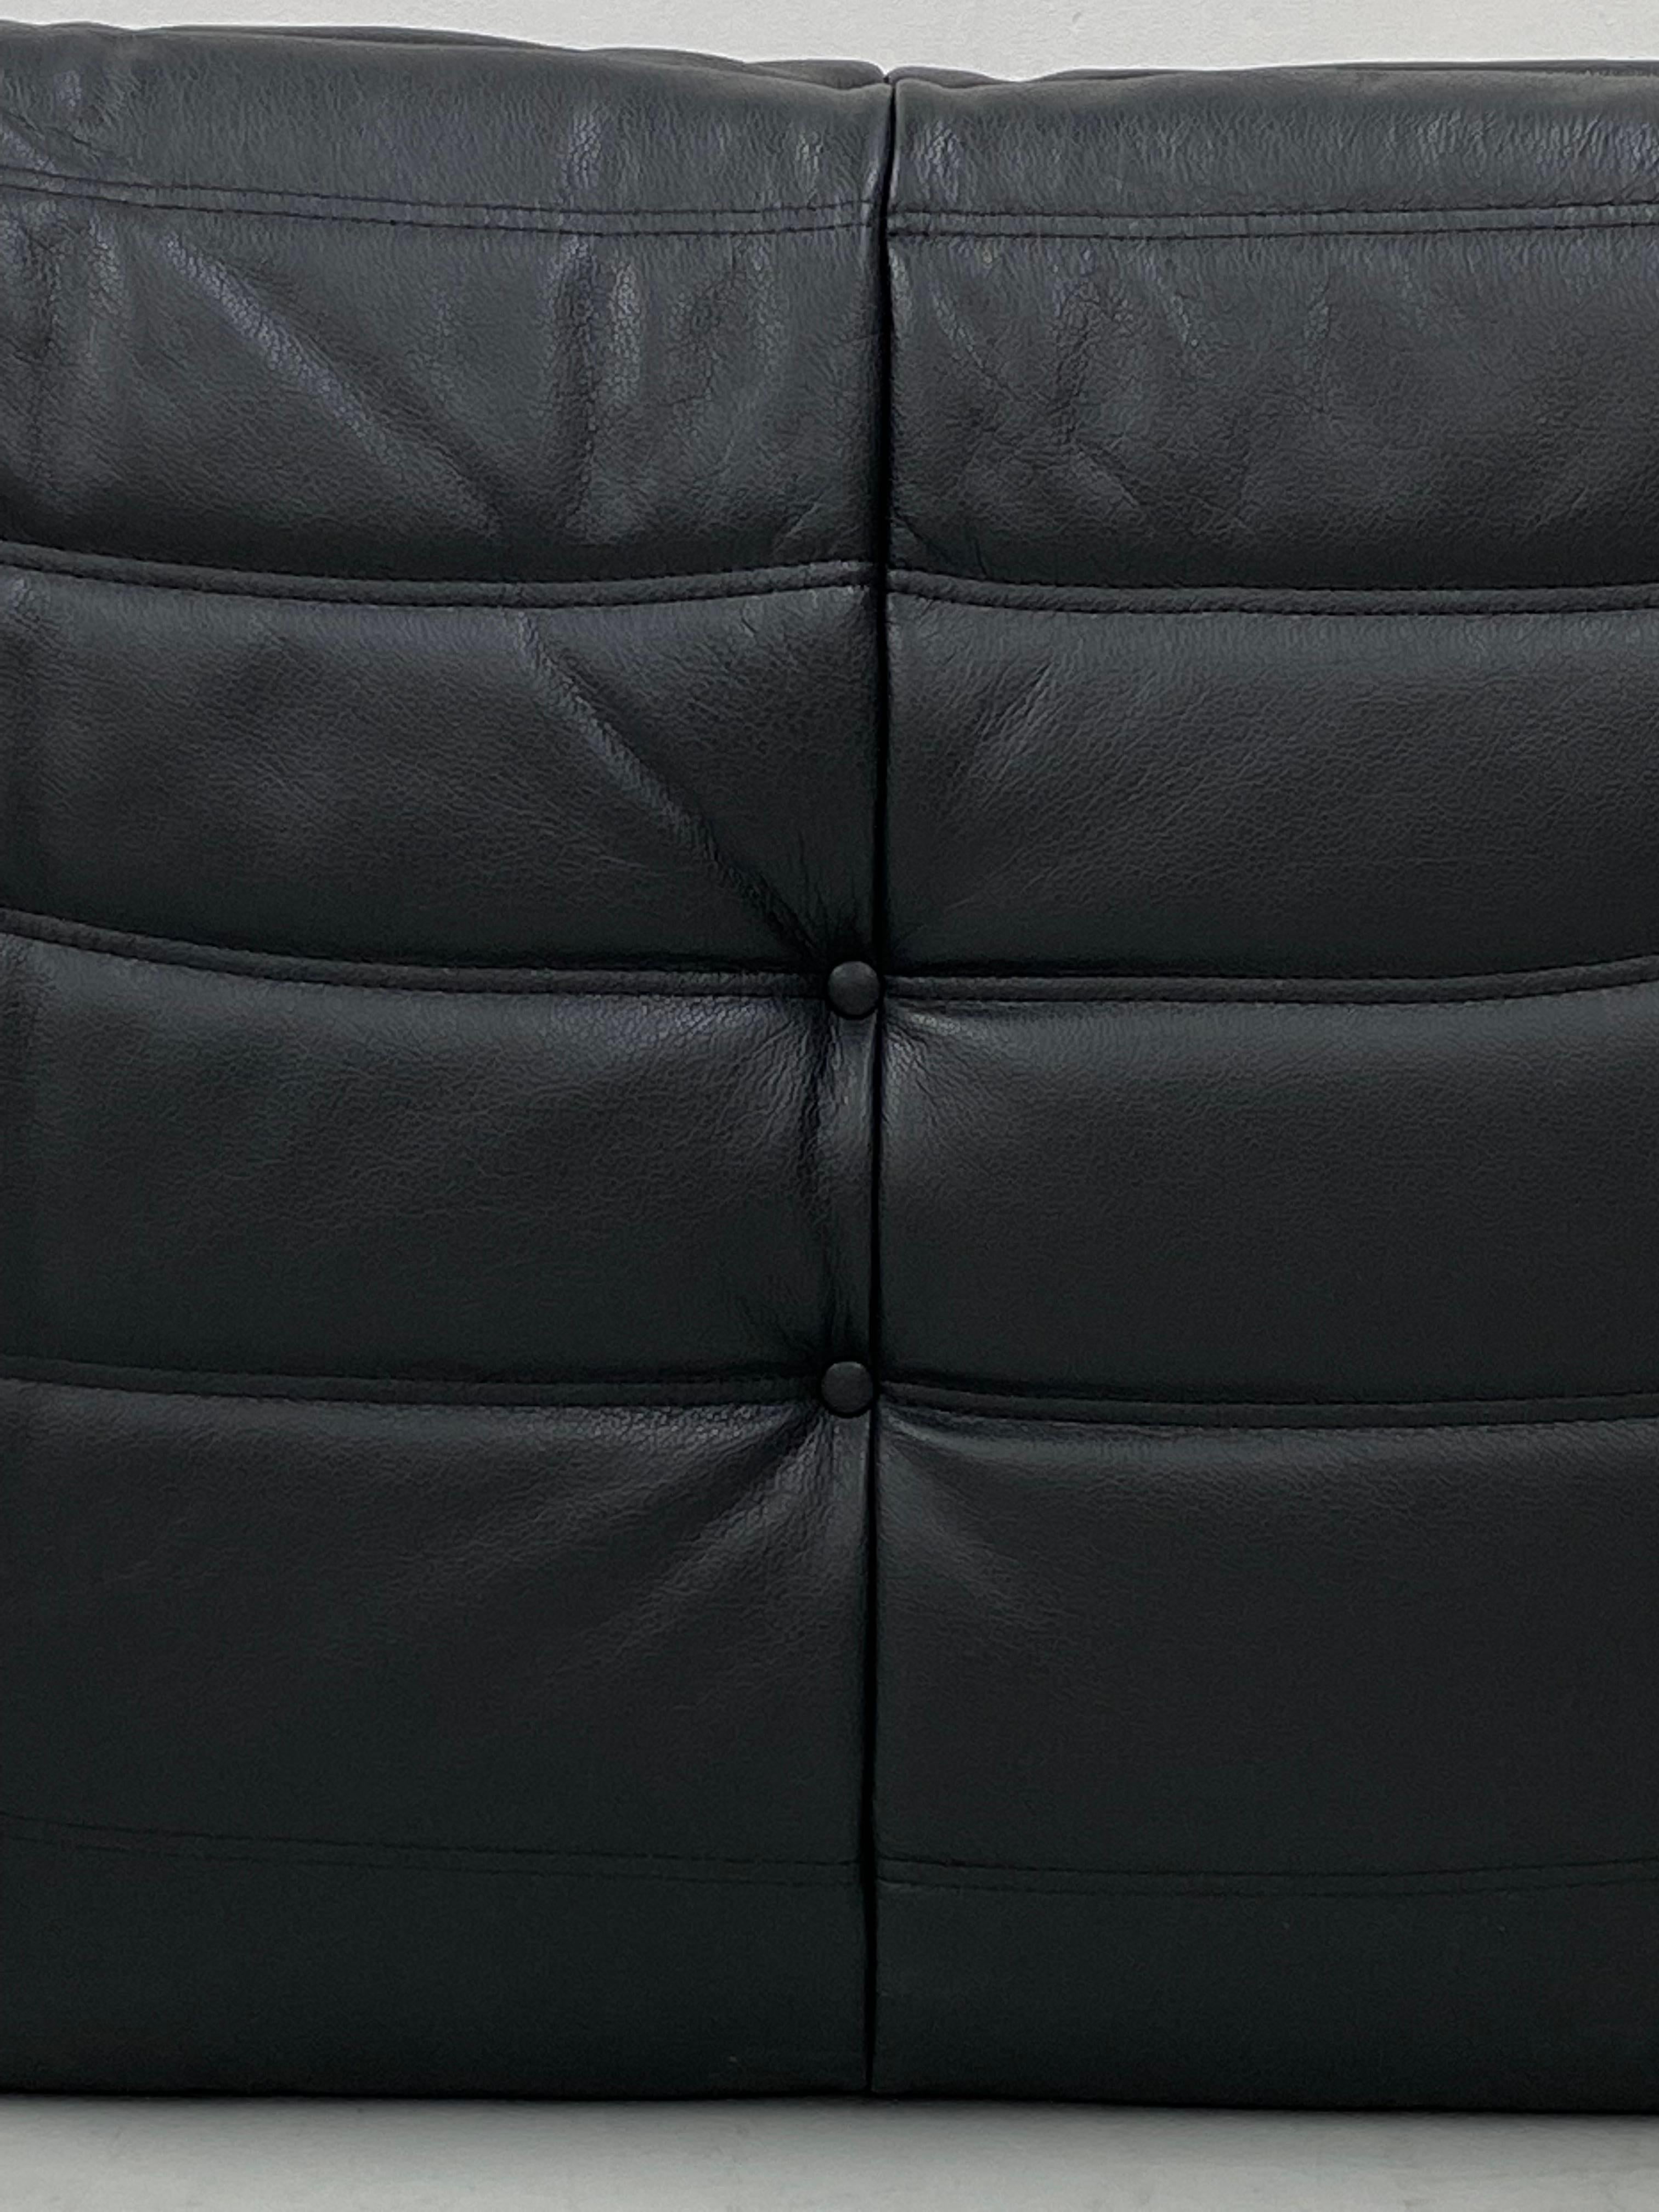 French Togo Chair in Black Leather by Michel Ducaroy for Ligne Roset. For Sale 4